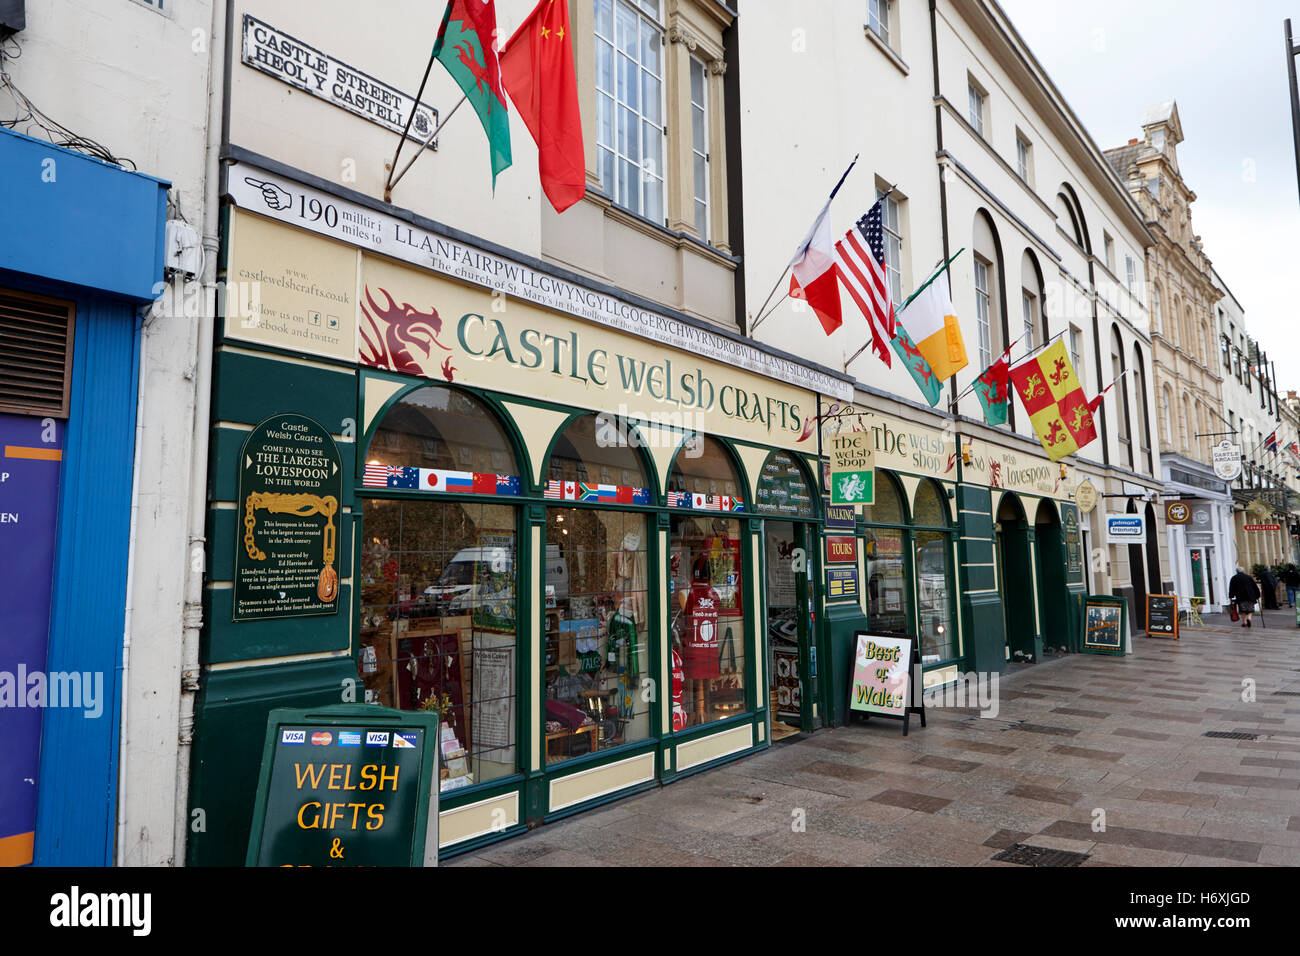 castle welsh crafts gift shop on castle street Cardiff Wales United Kingdom Stock Photo